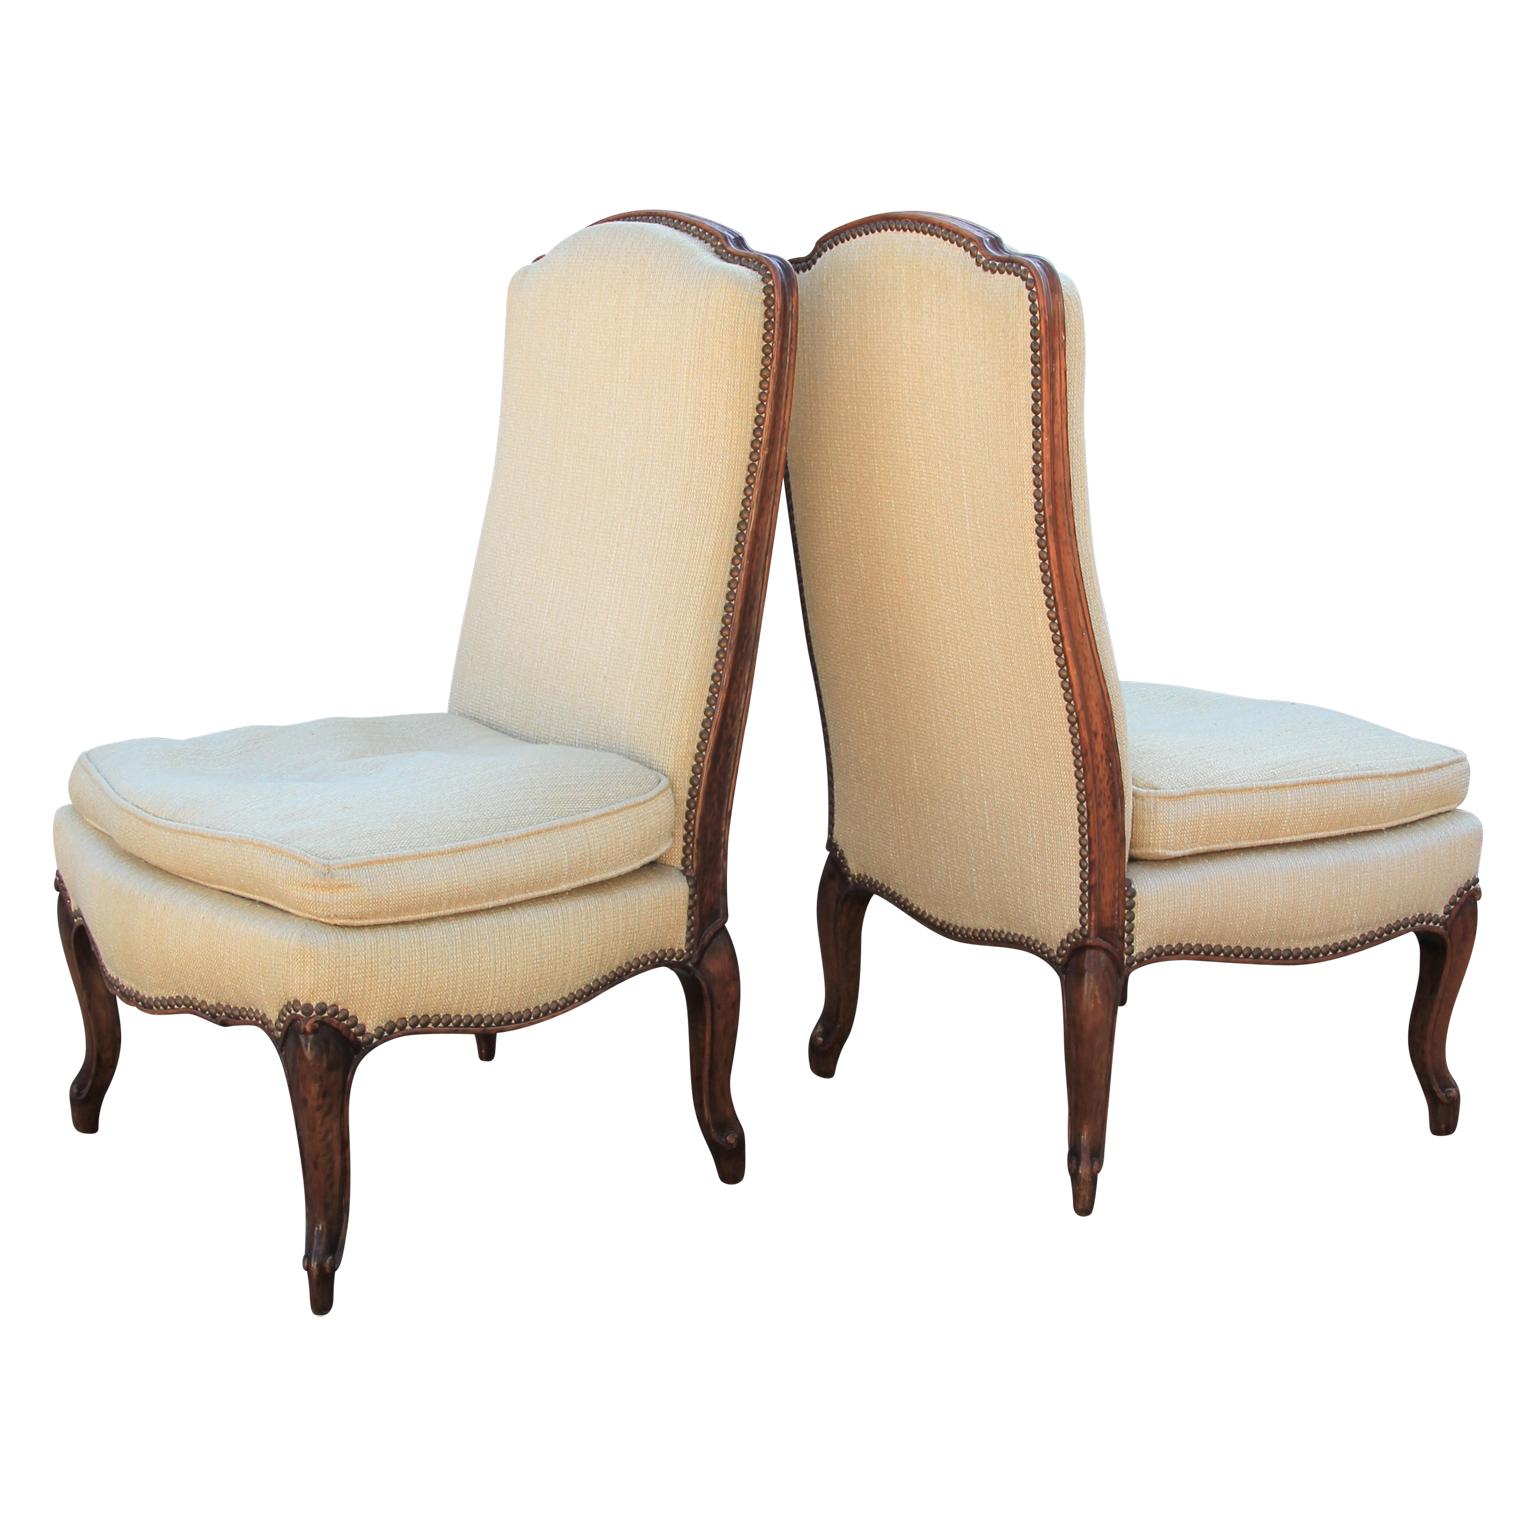 Wonderful little pair of Italian, possibly French slipper chairs. They are made out of a beautiful walnut. The fabric is vintage but usable. COM suggested for perfection. Excellent scale for small accent chairs.
  